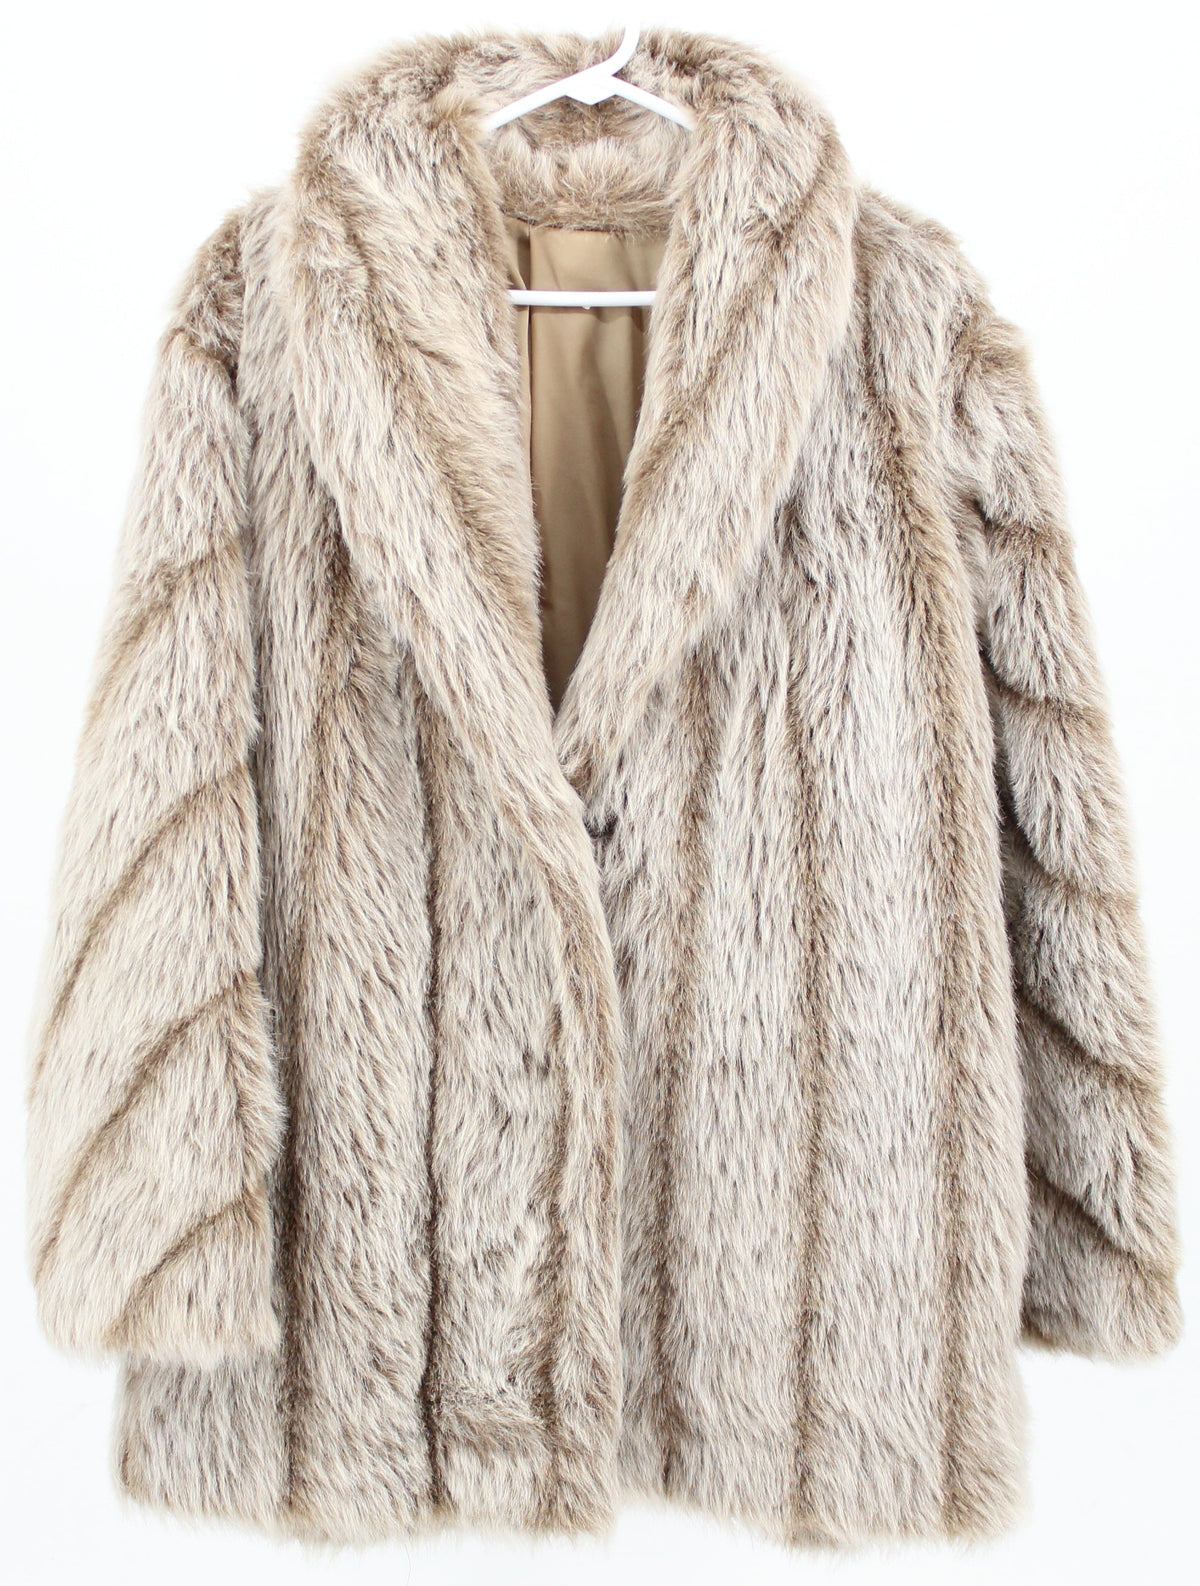 Blair Striped Brown and Beige Mid Faux Fur Coat